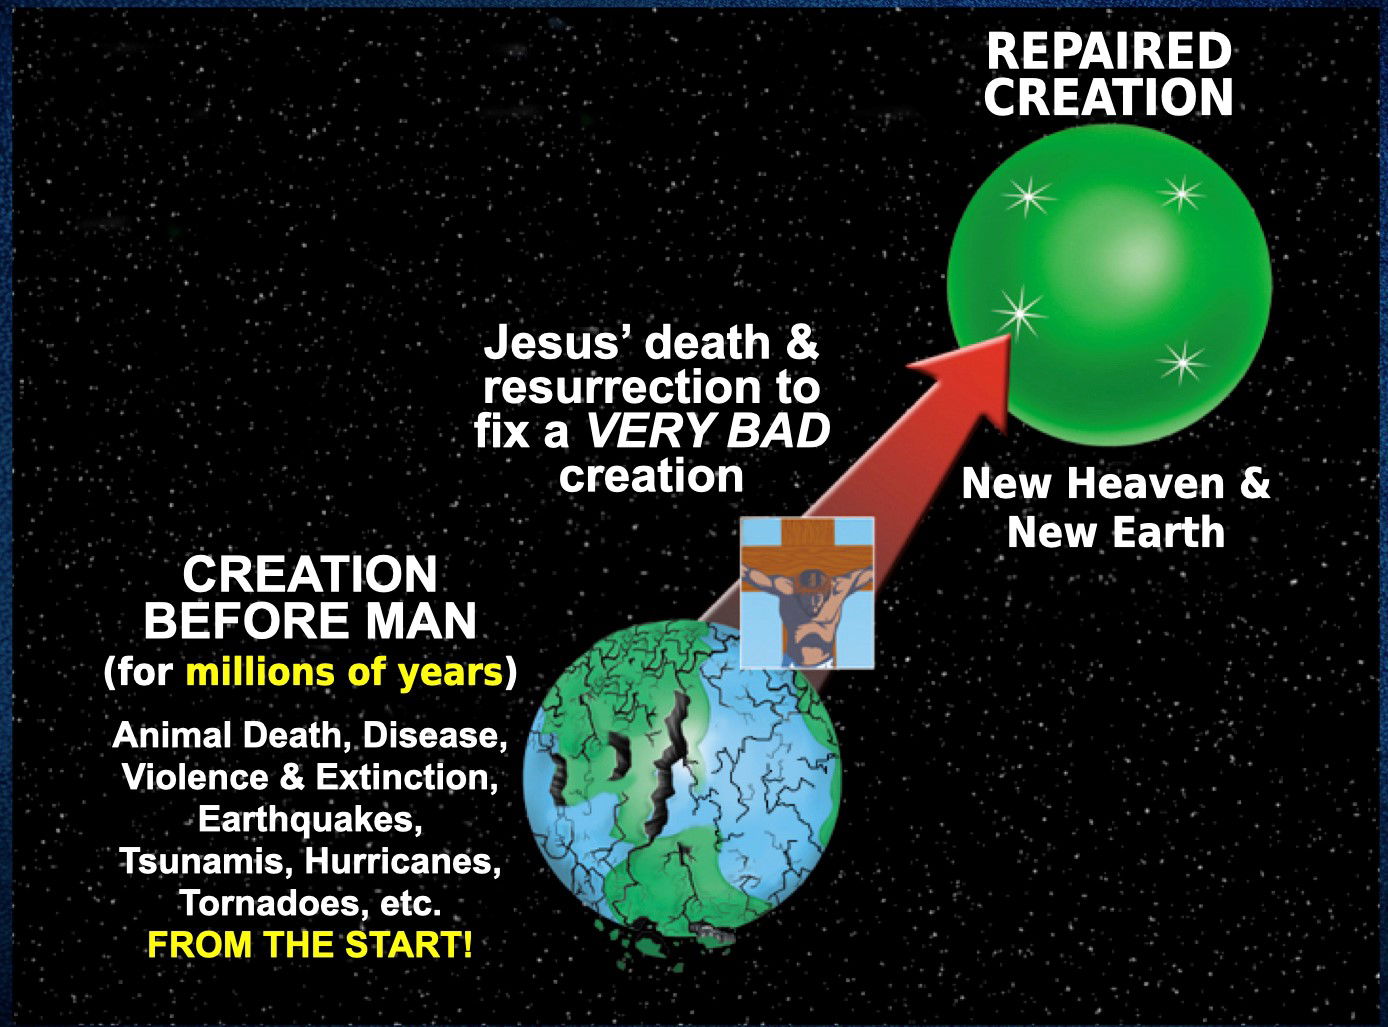 Antibiblical view of the earth’s history